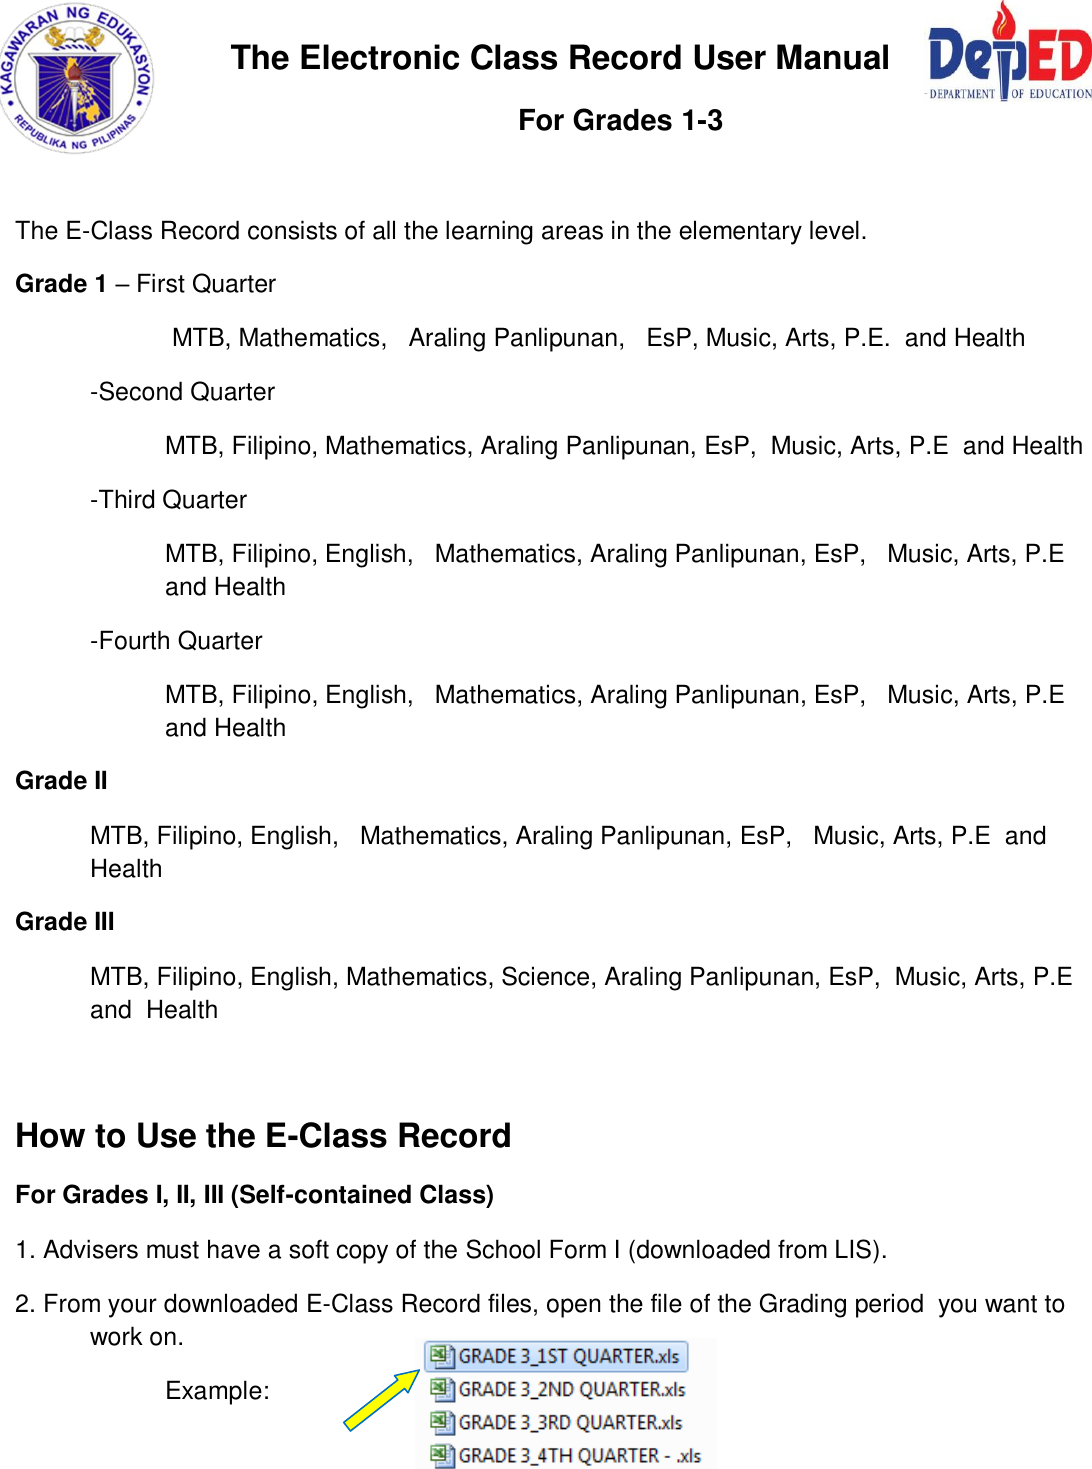 Page 1 of 3 - The Electronic Class Record User Manual For Grades 1-3 (Self-contained Class)